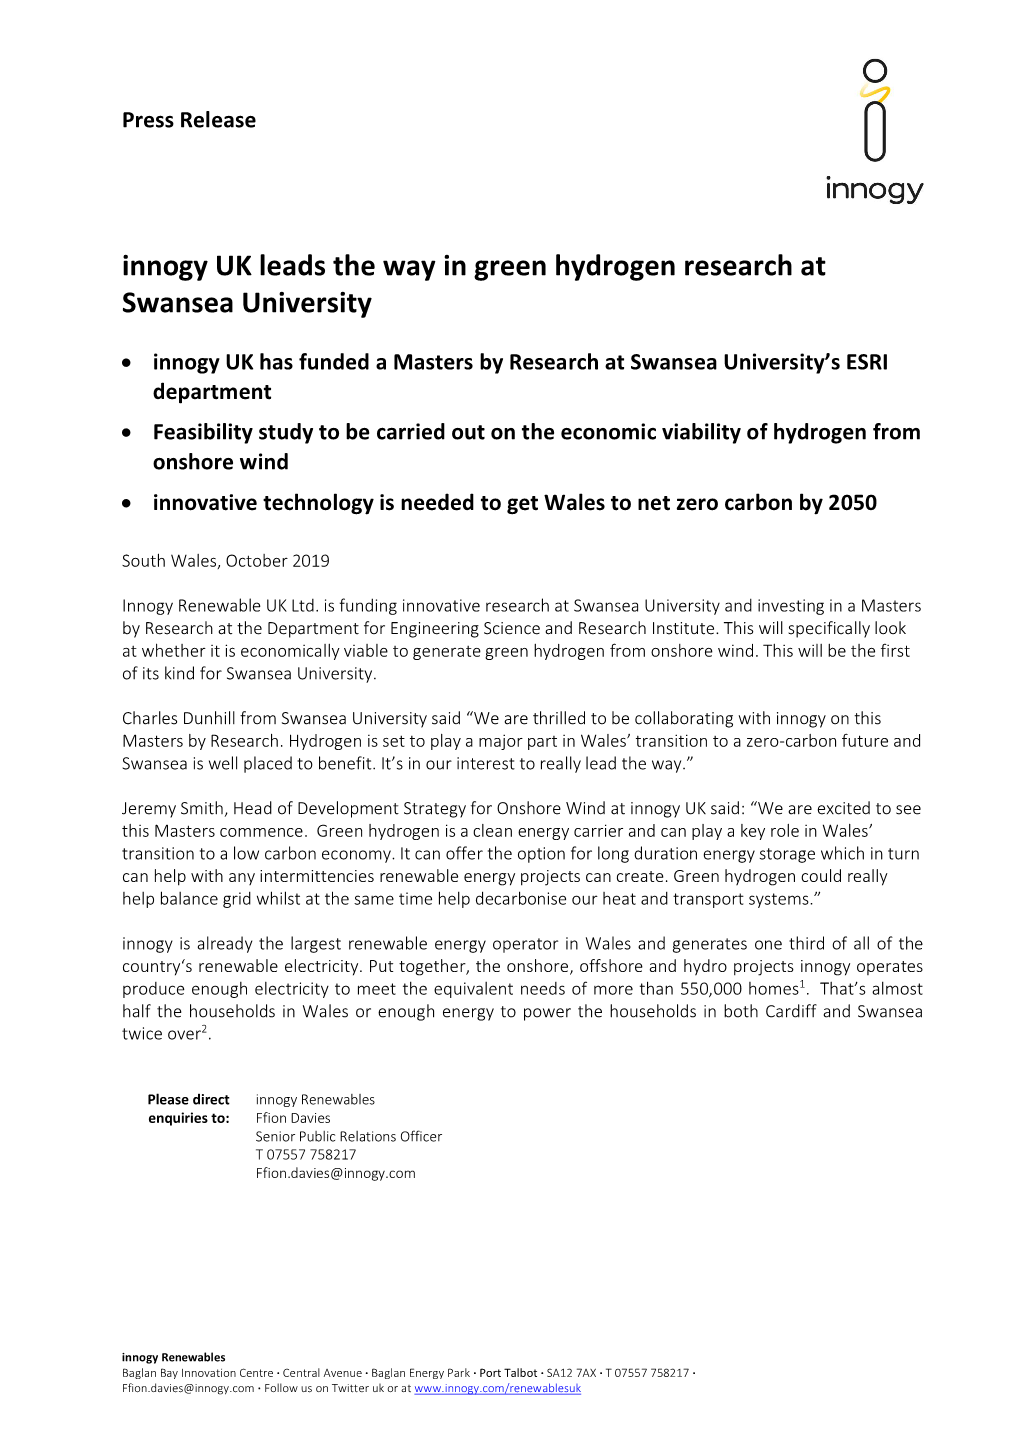 Innogy UK Leads the Way in Green Hydrogen Research at Swansea University